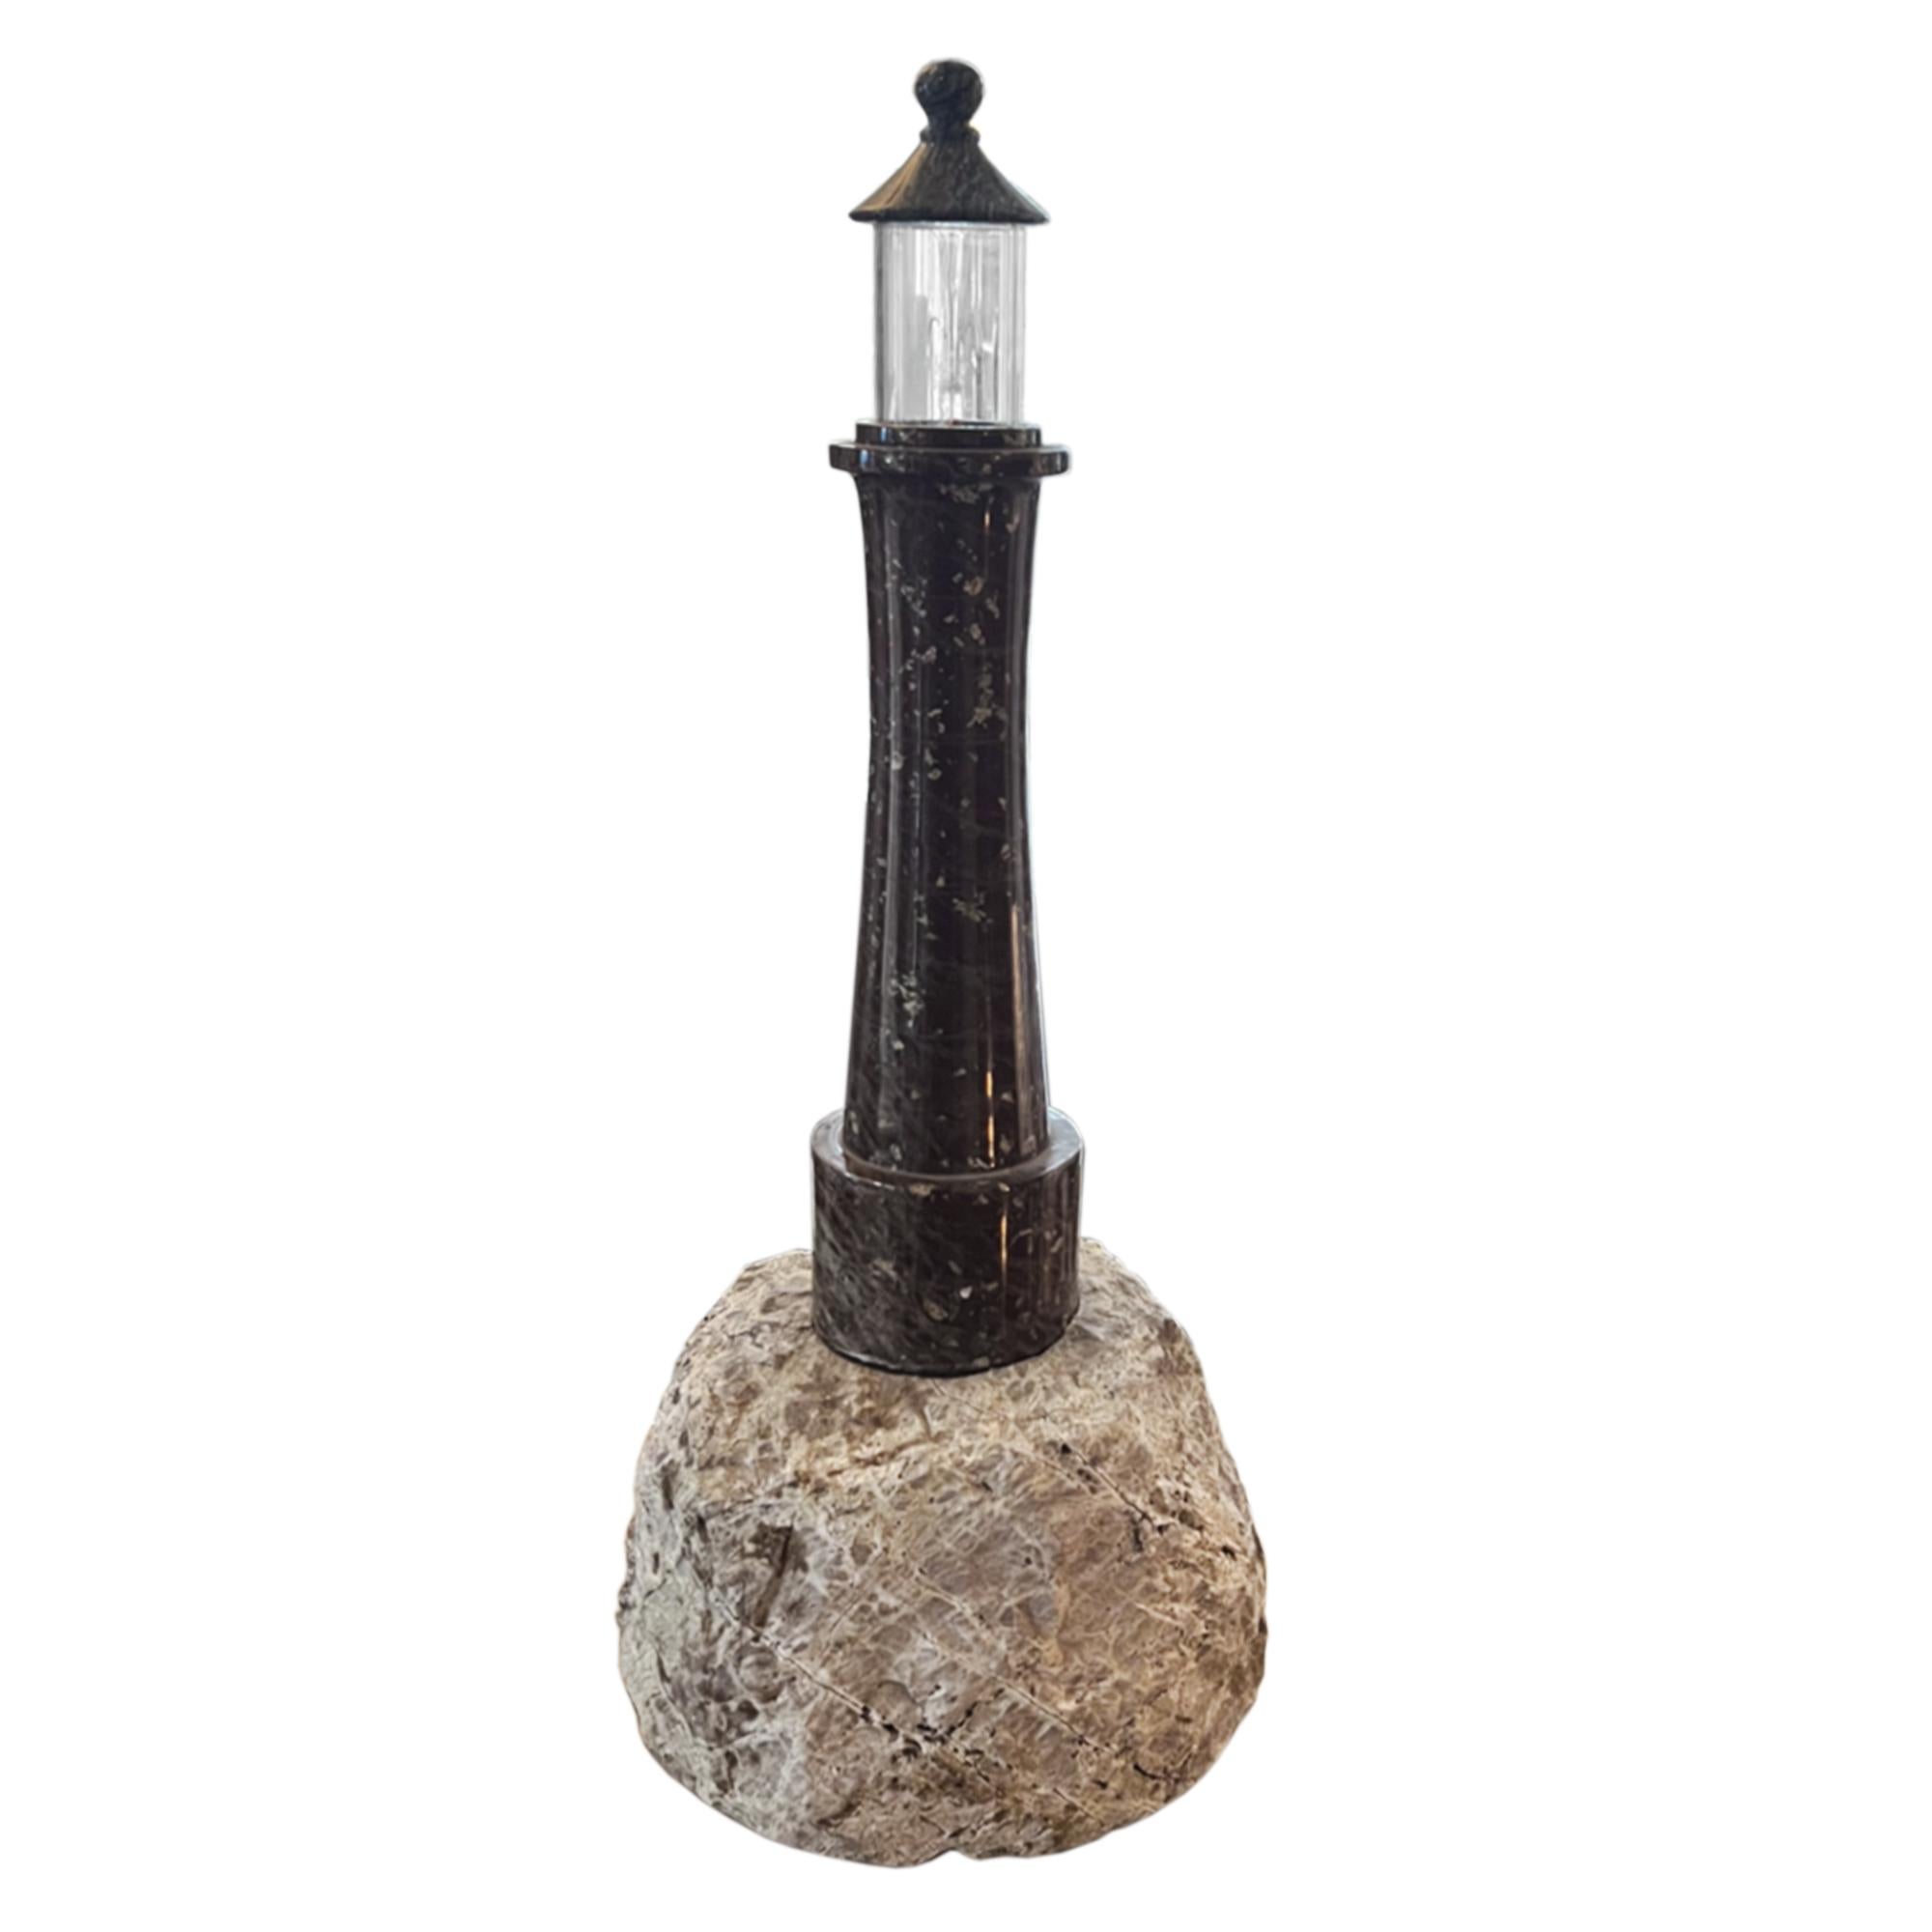 These table lamps are iconic Cornish antiques. Hand crafted from the local Serpentine stone near The Lizard - the extraction of this rock is now very limited and only small items are now made. 

We currently have two of these table lamps for sale